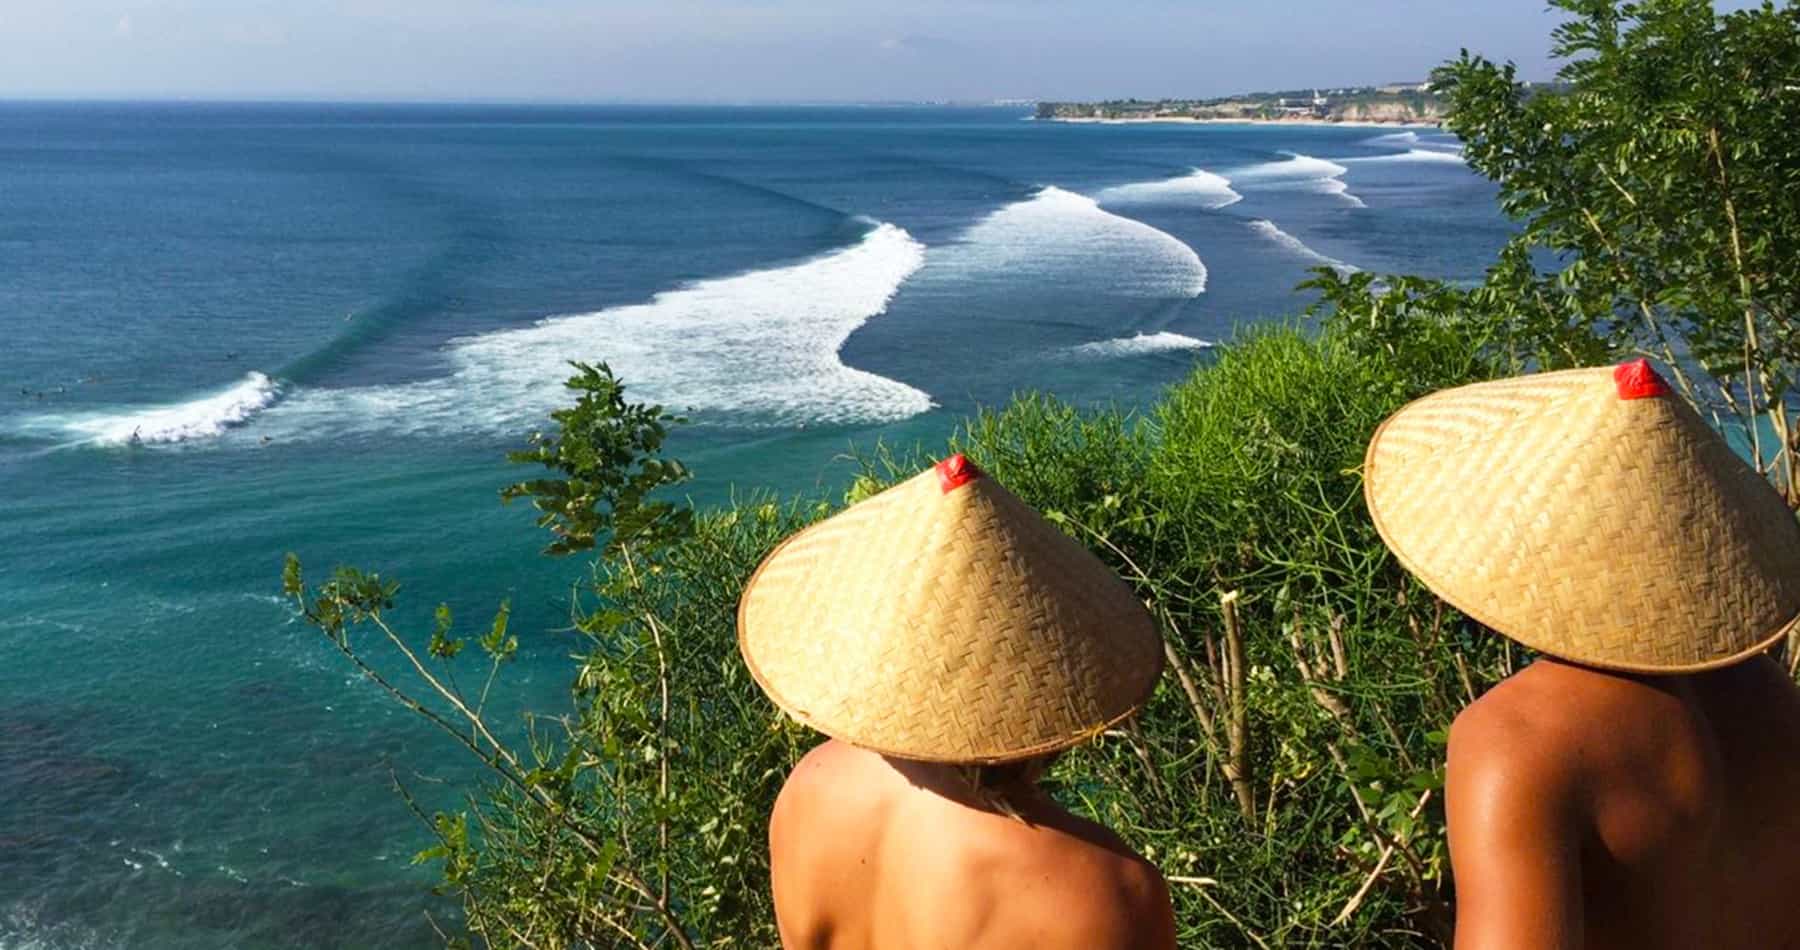 indonesia surf trip itinerary